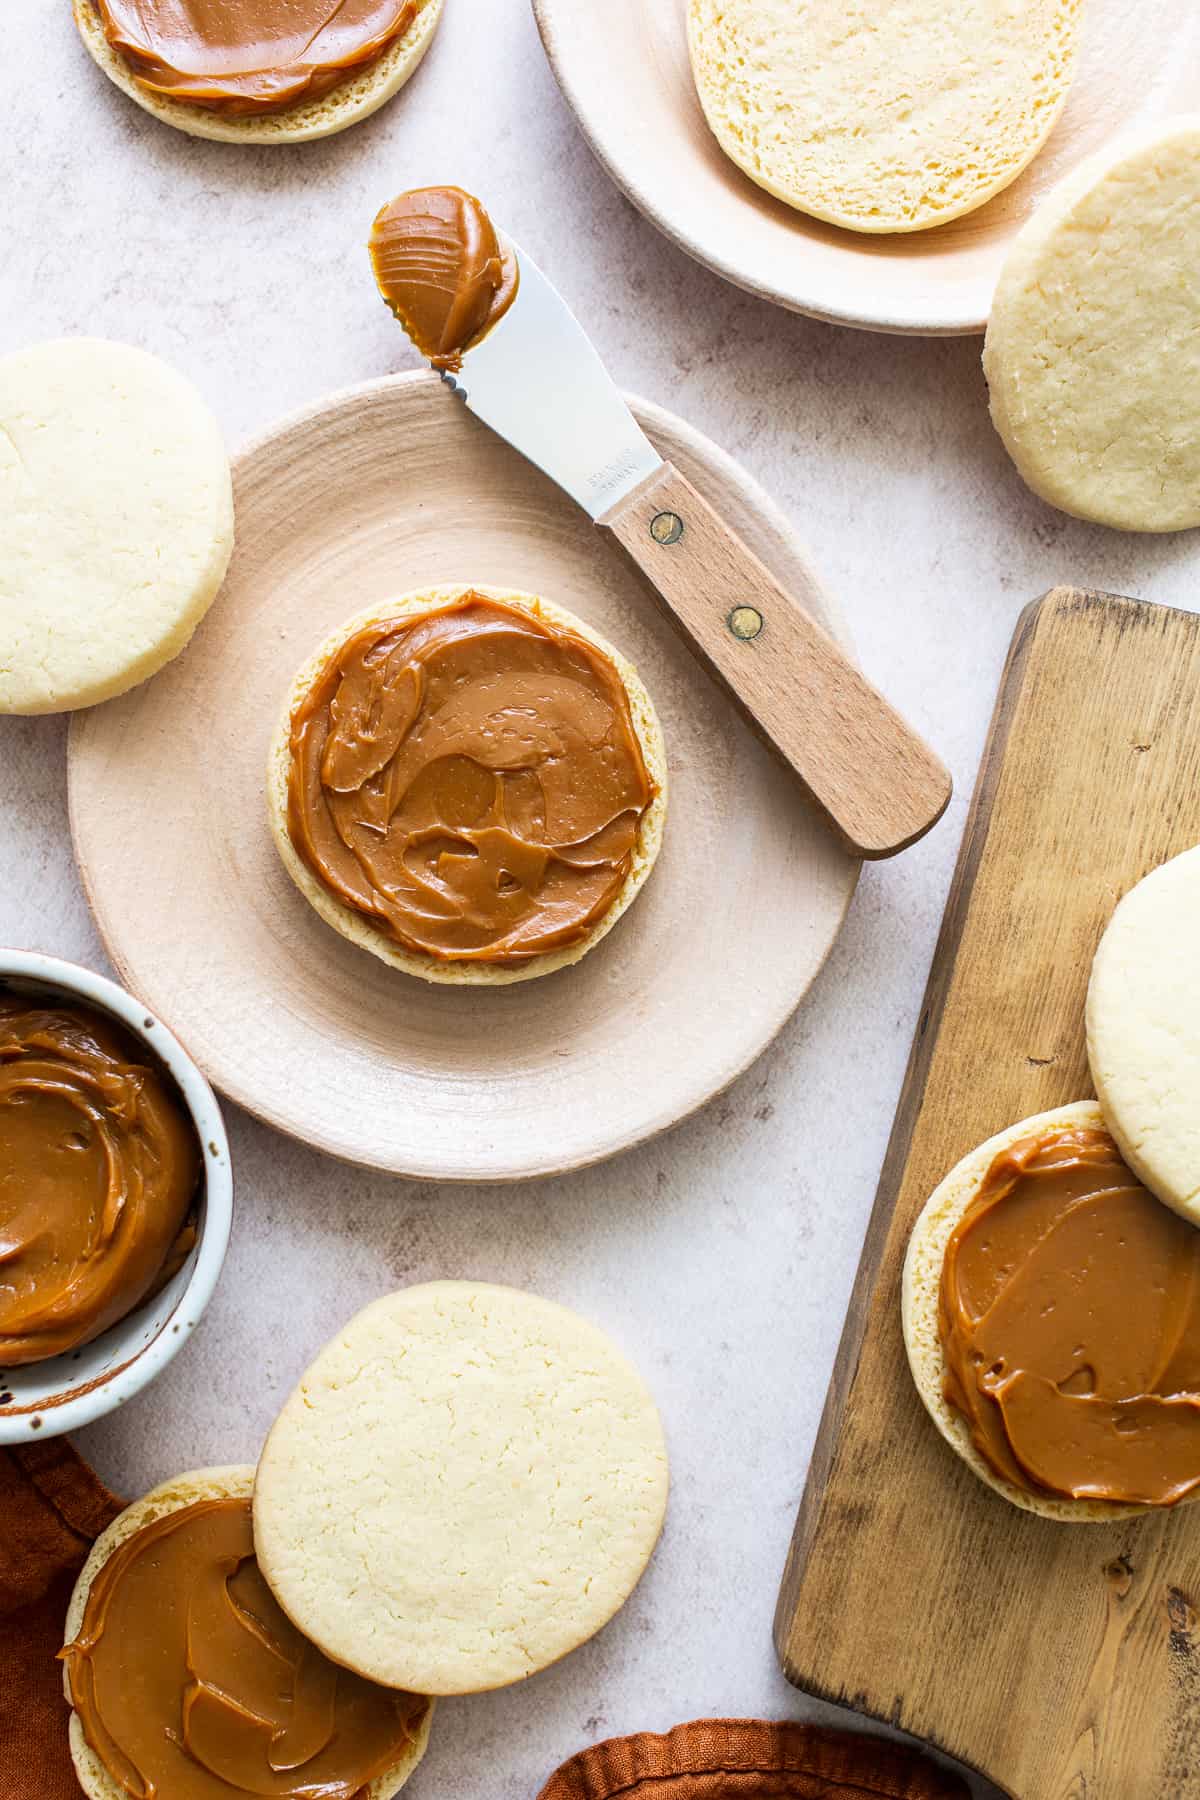 Dulce de leche being spread on alfajore cookies before being sandwiched together.